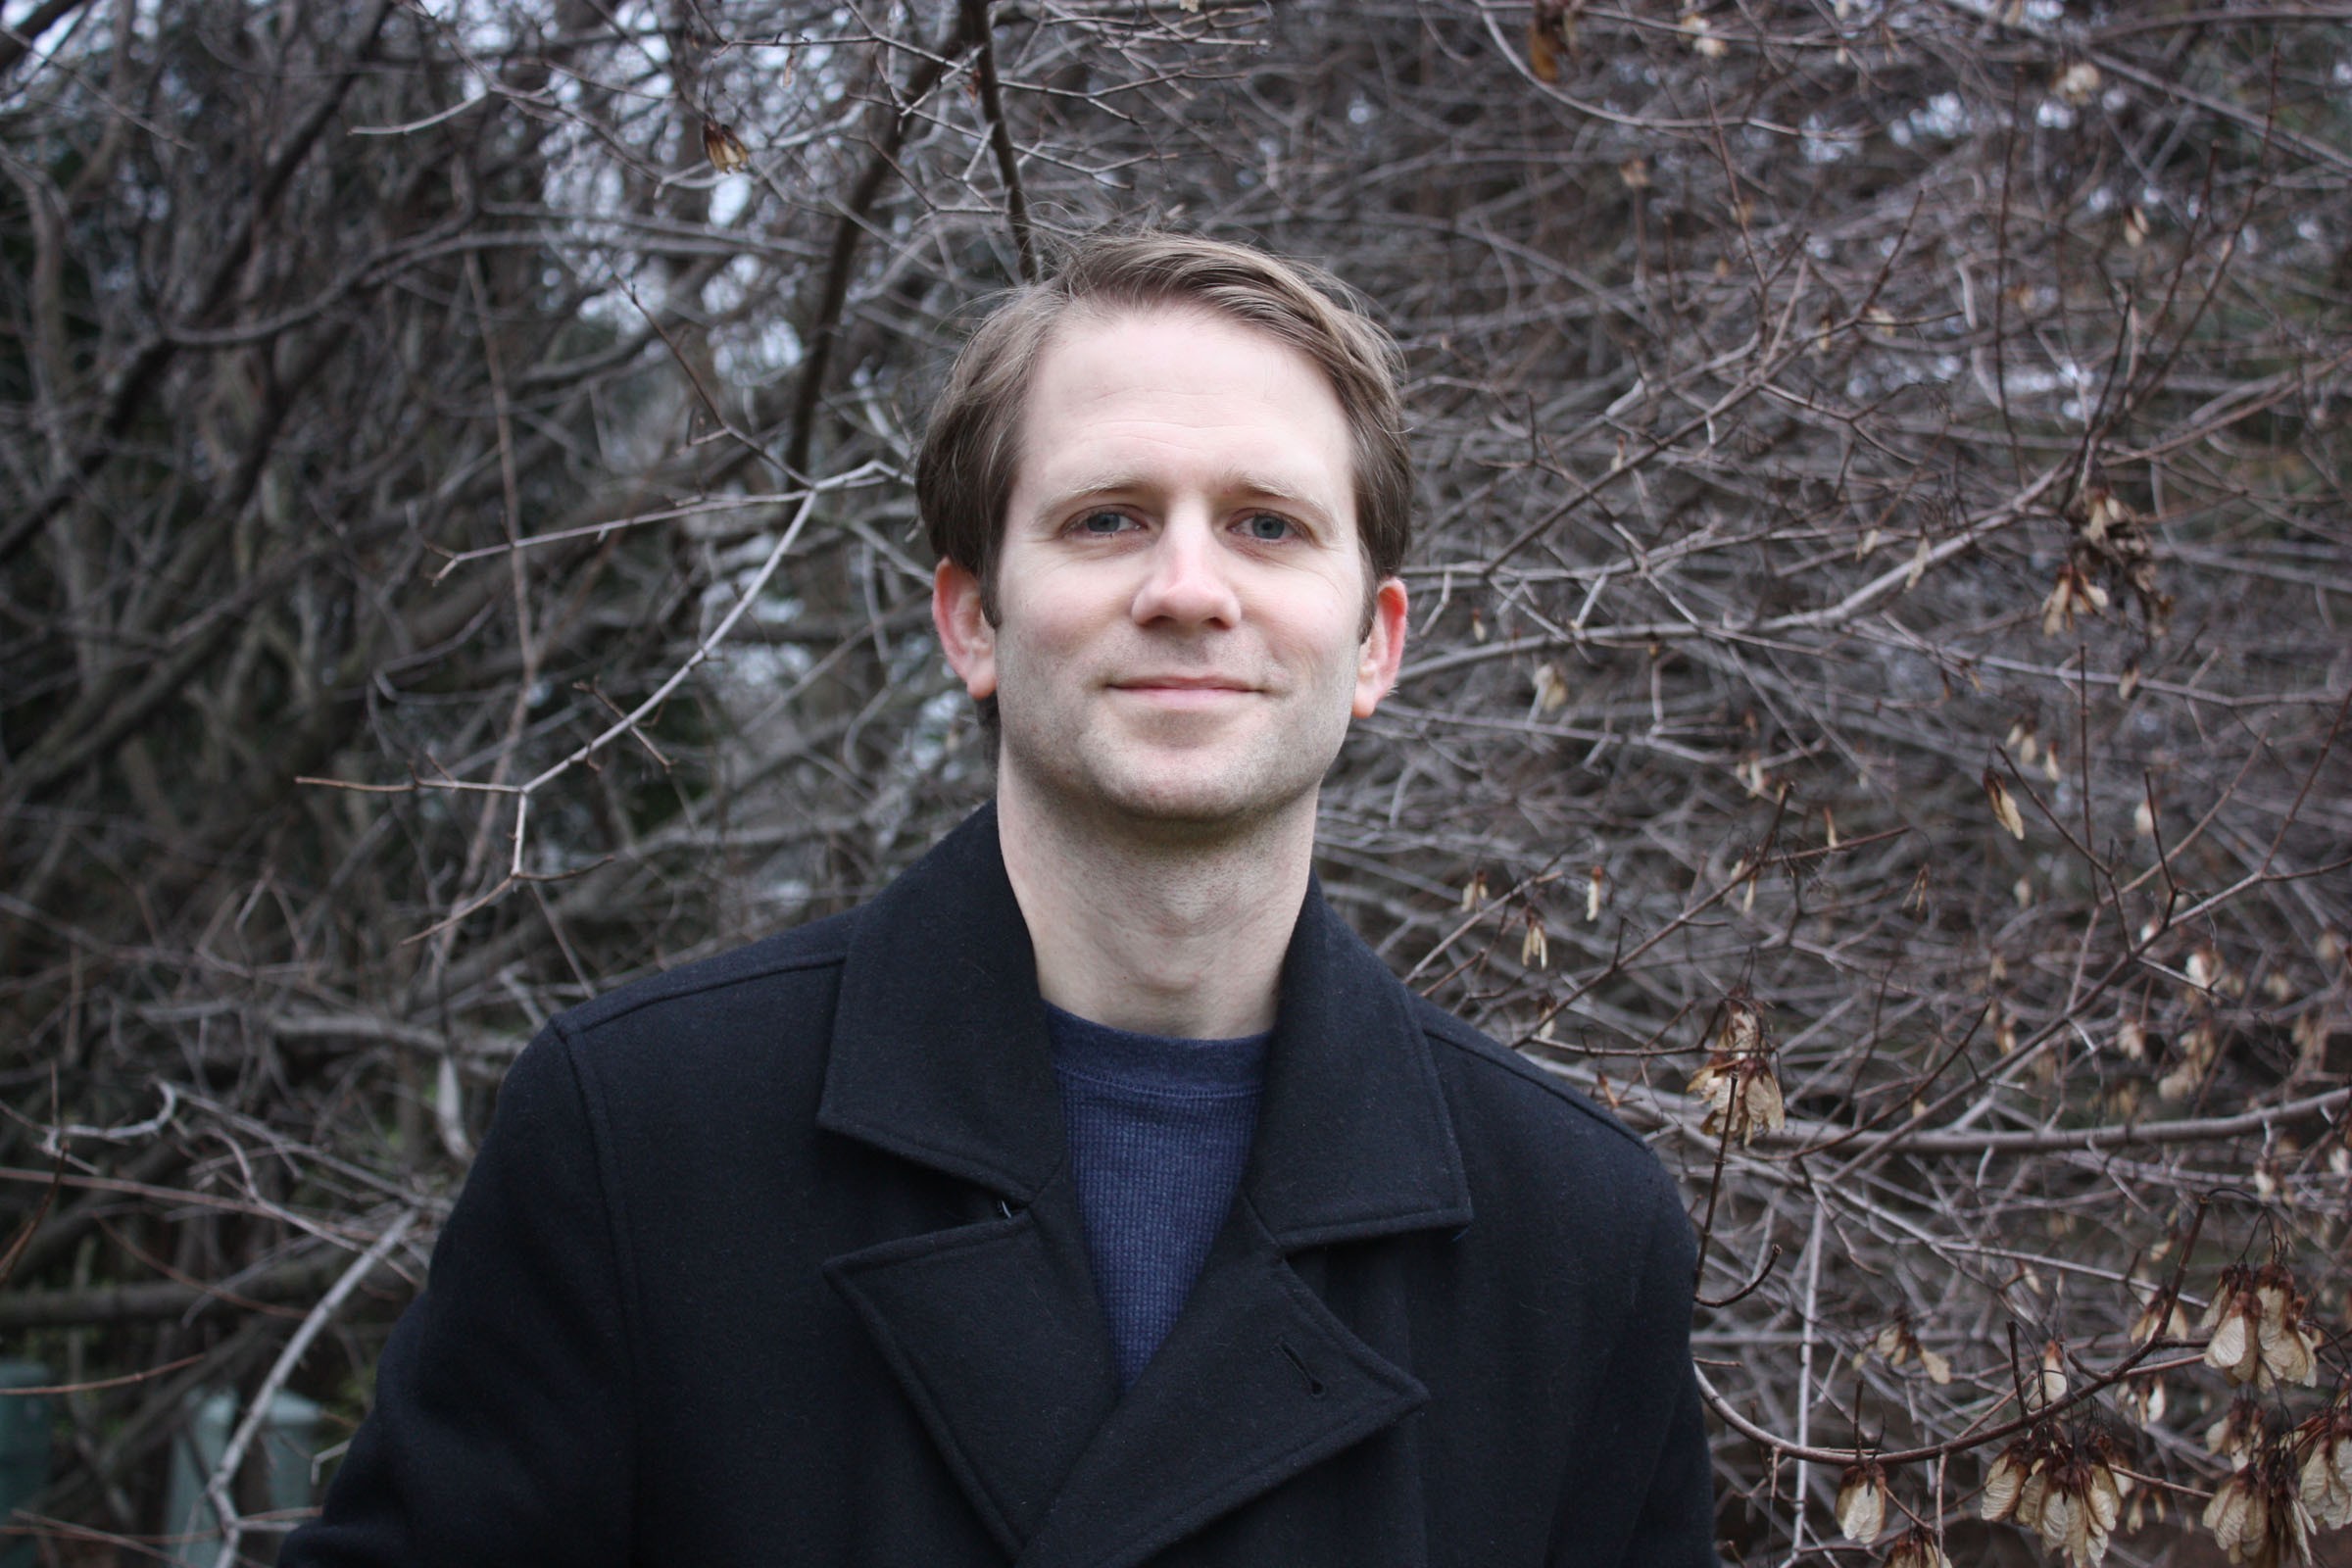 Matthew Cordell won the Caldecott Medal in 2018 for his book Wolf in the Snow.  